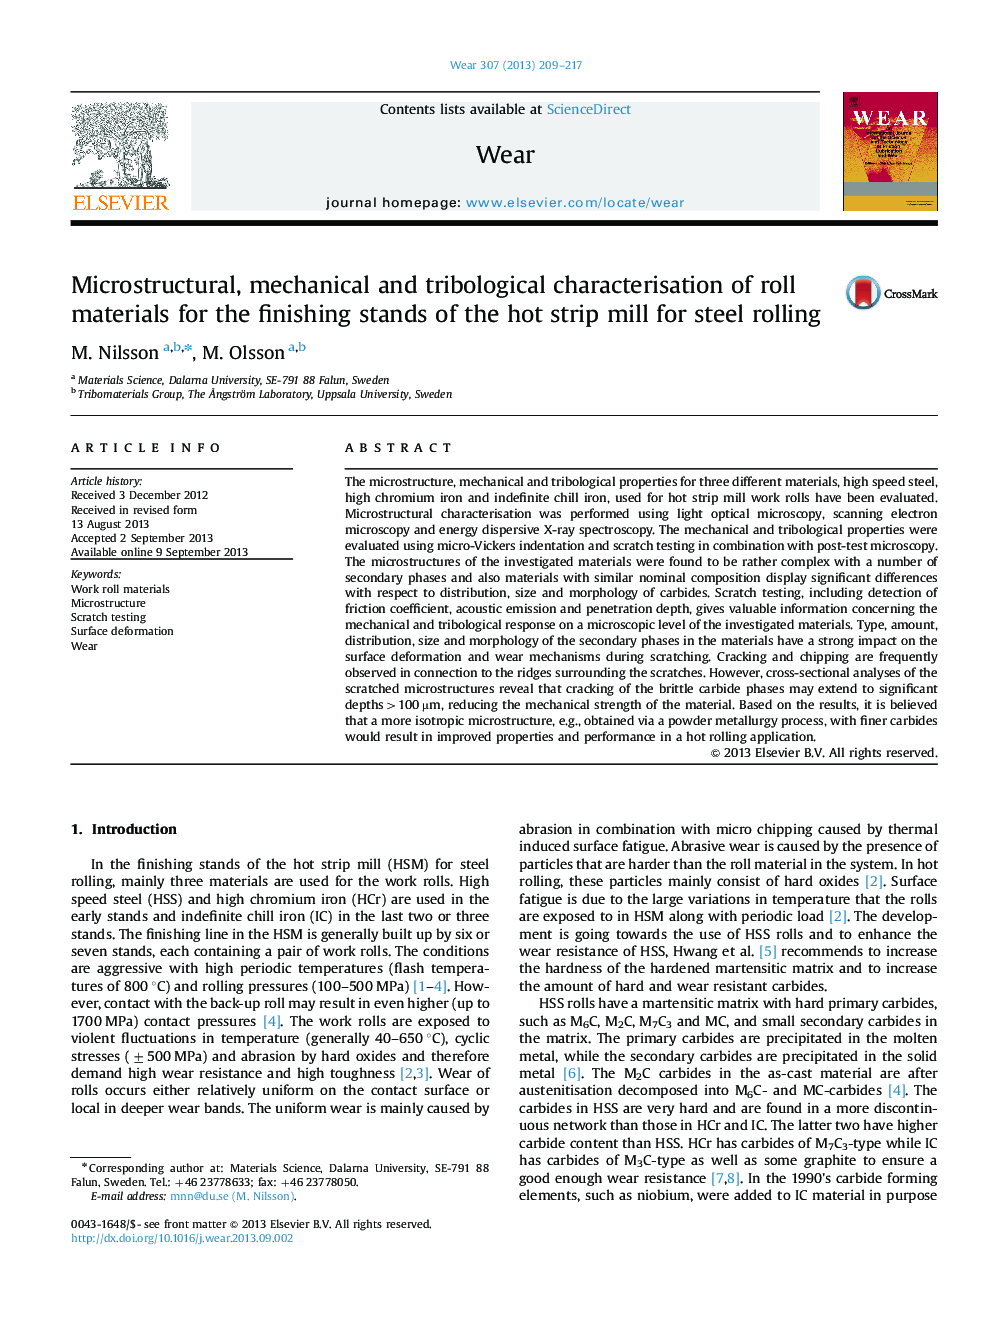 Microstructural, mechanical and tribological characterisation of roll materials for the finishing stands of the hot strip mill for steel rolling